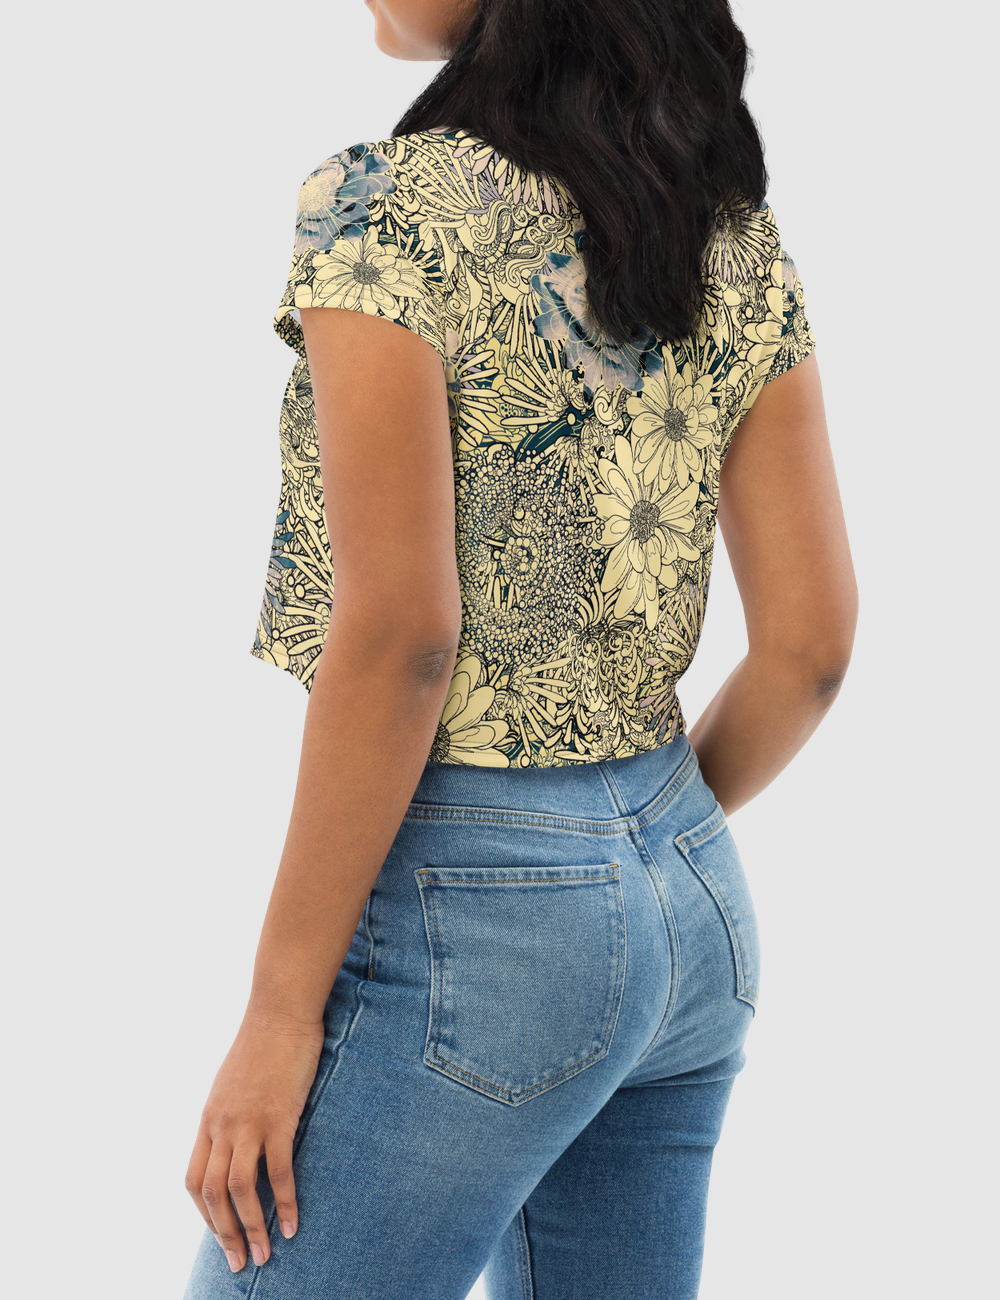 Floral Bloom | Women's Sublimated Crop Top T-Shirt OniTakai